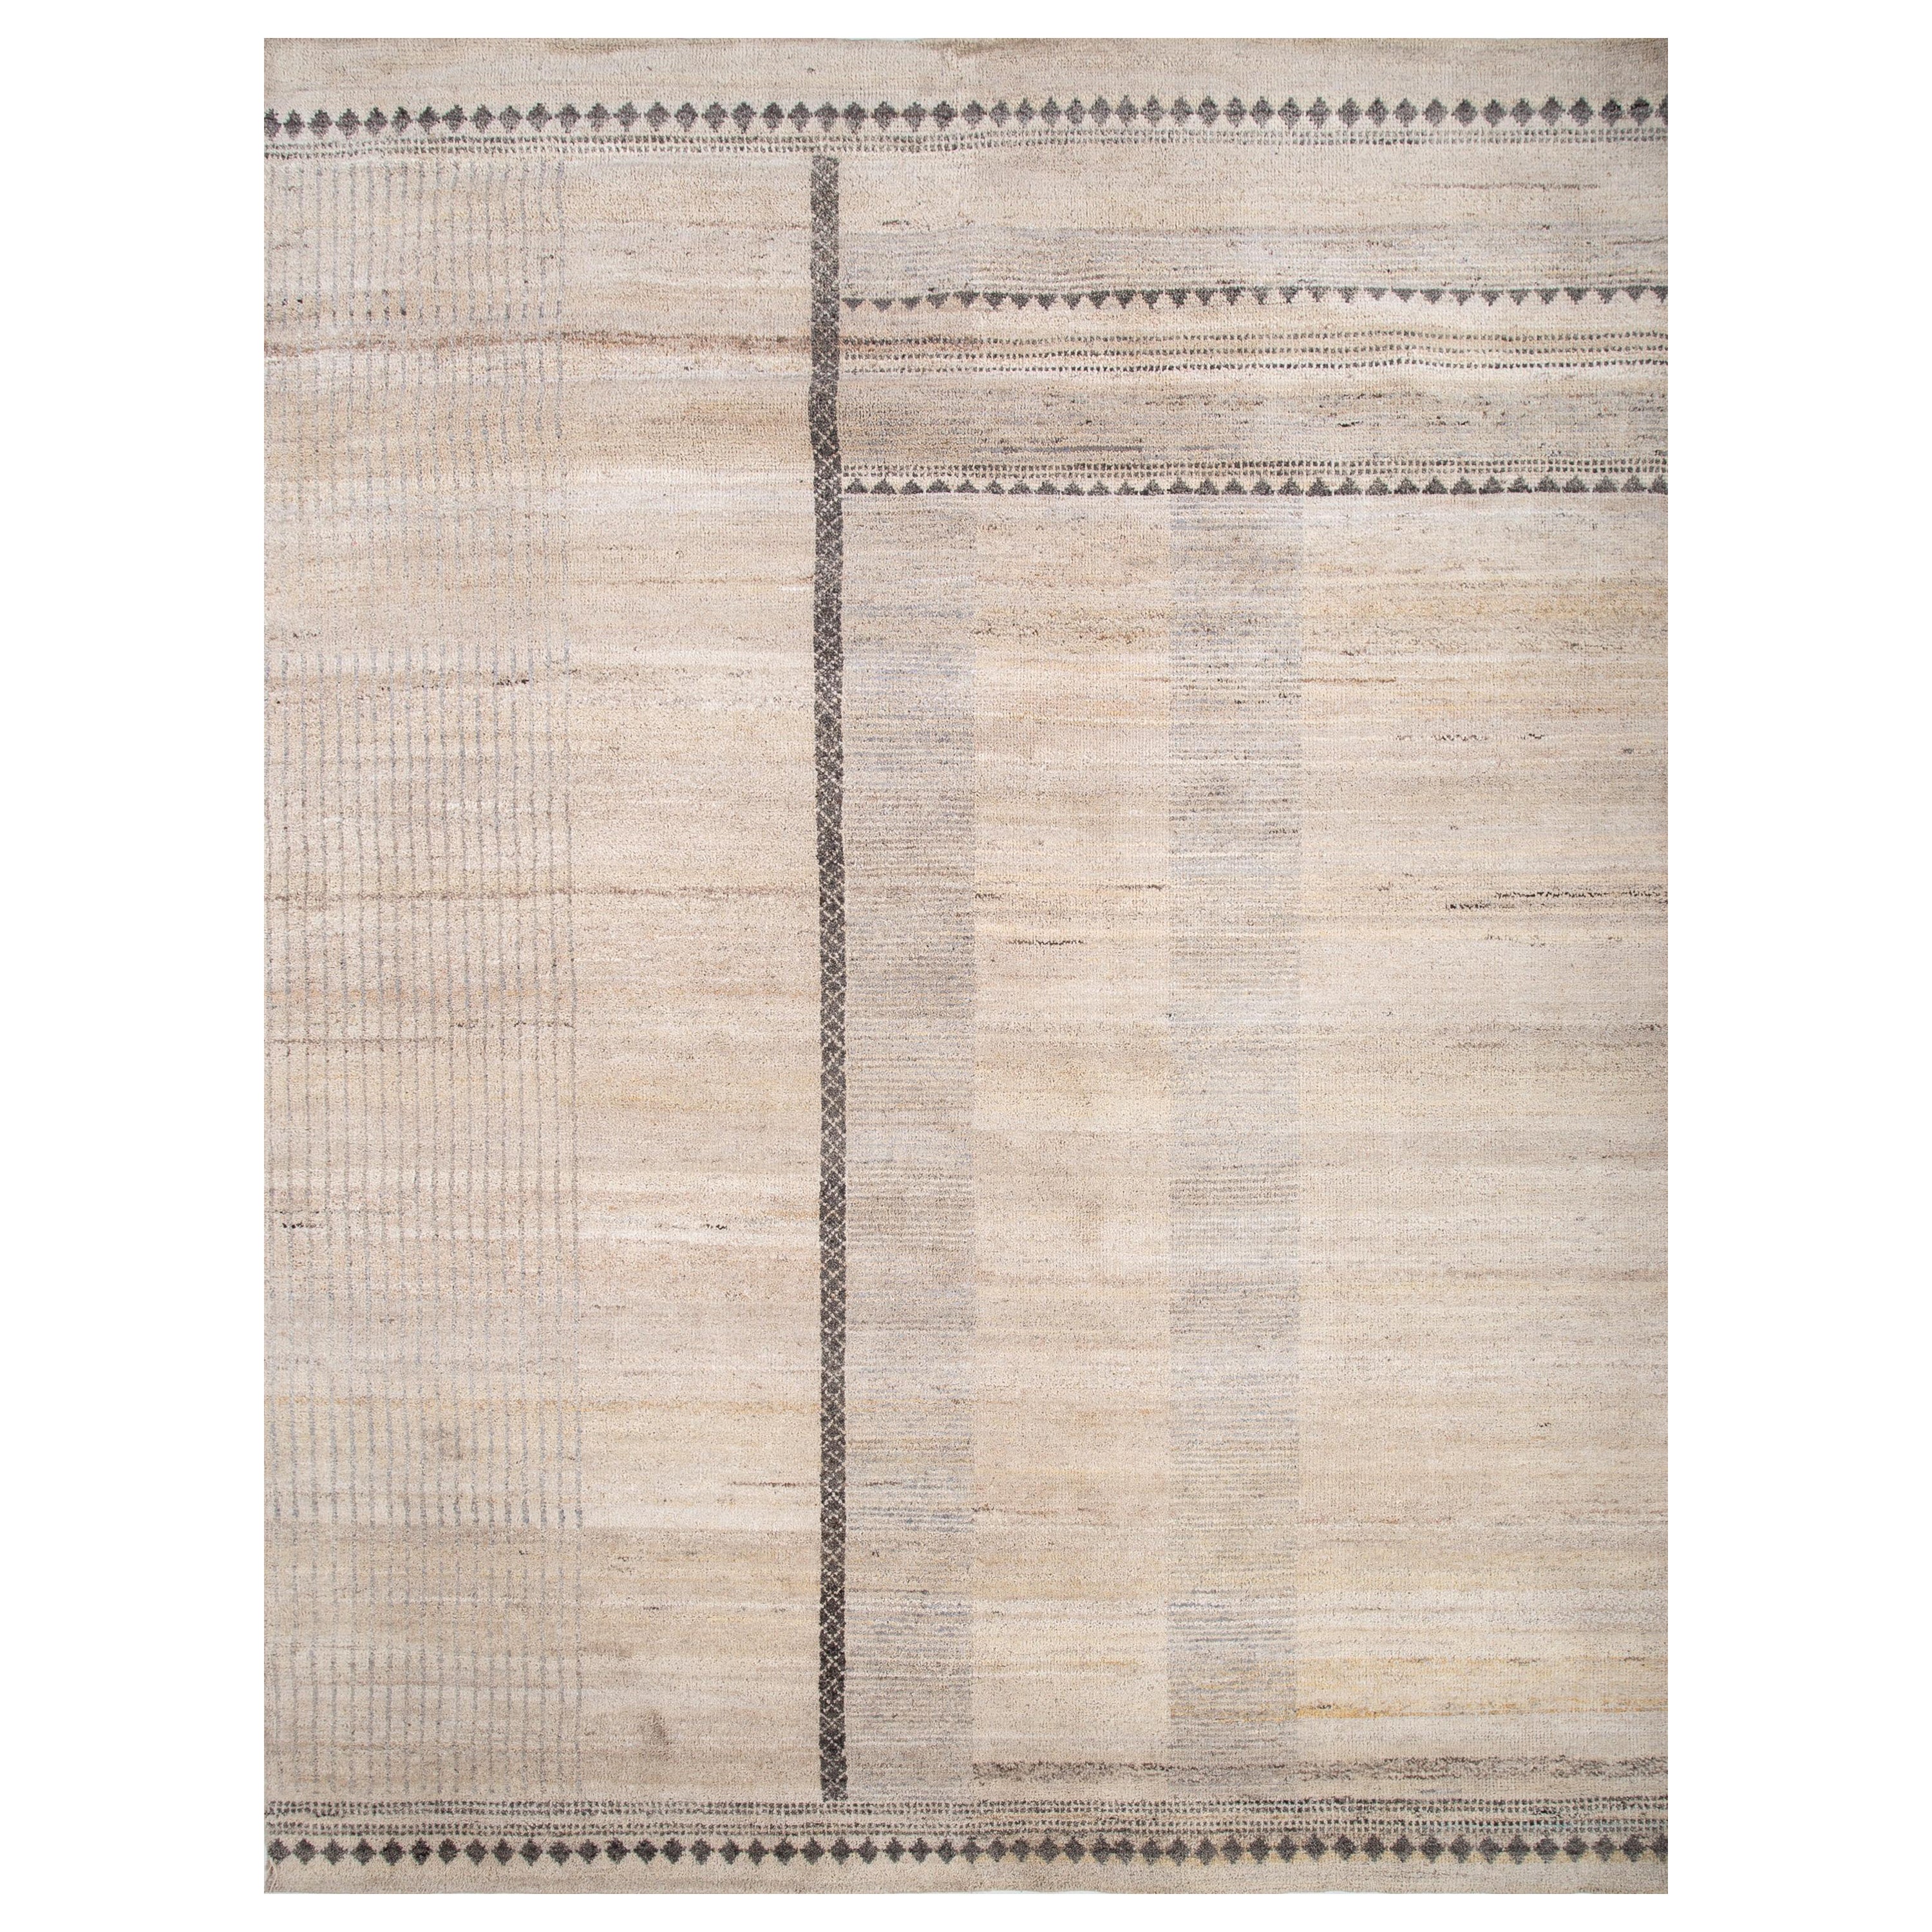 Statement Simplicity White & White 270x360 cm Handknotted Rug